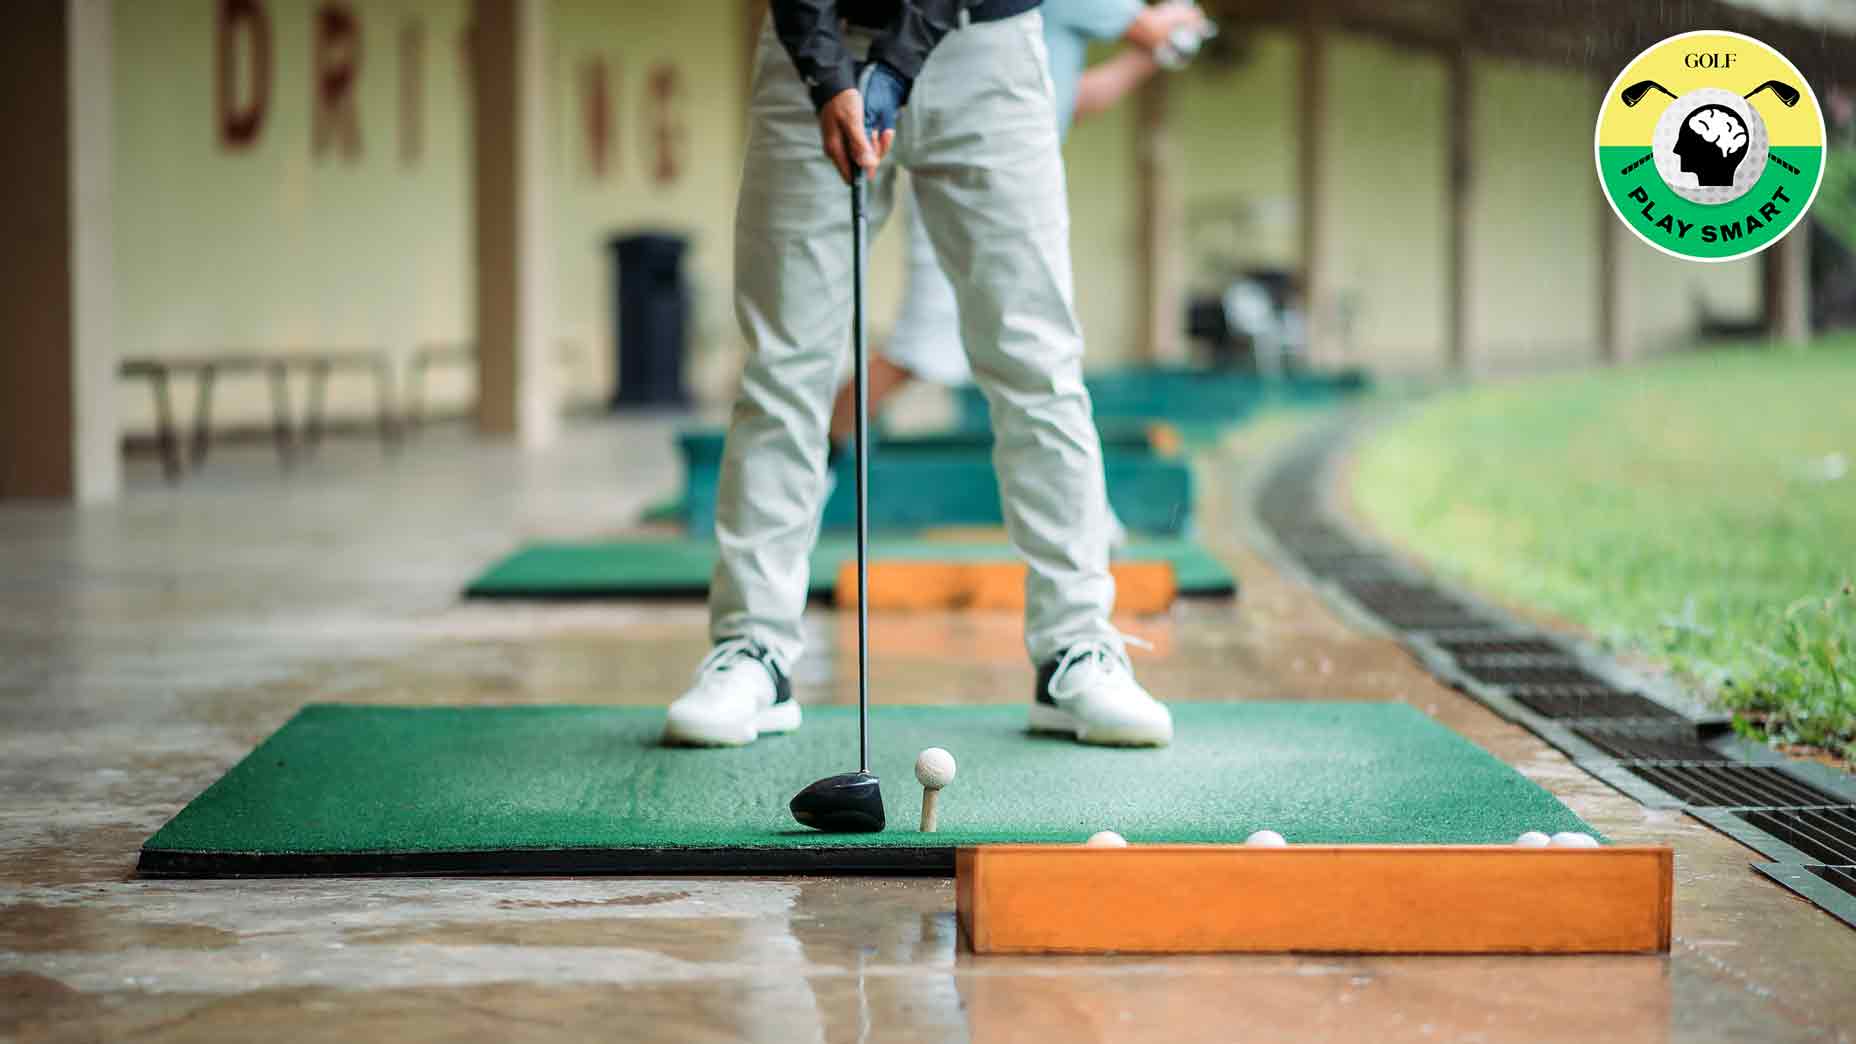 How to play better golf without taking a lesson